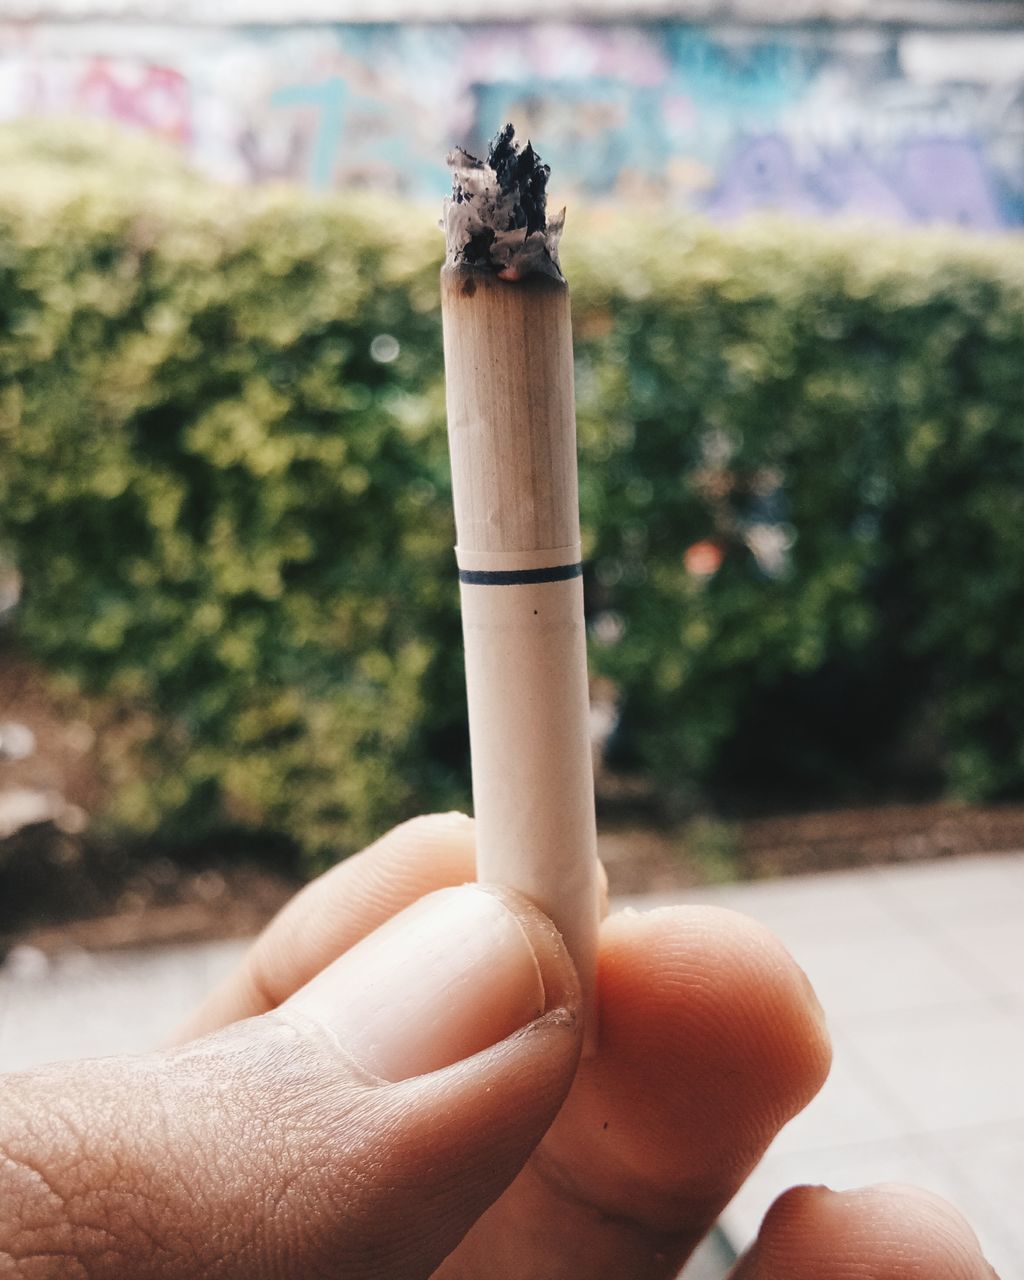 CLOSE-UP OF HAND HOLDING CIGARETTE AGAINST BLURRED BACKGROUND